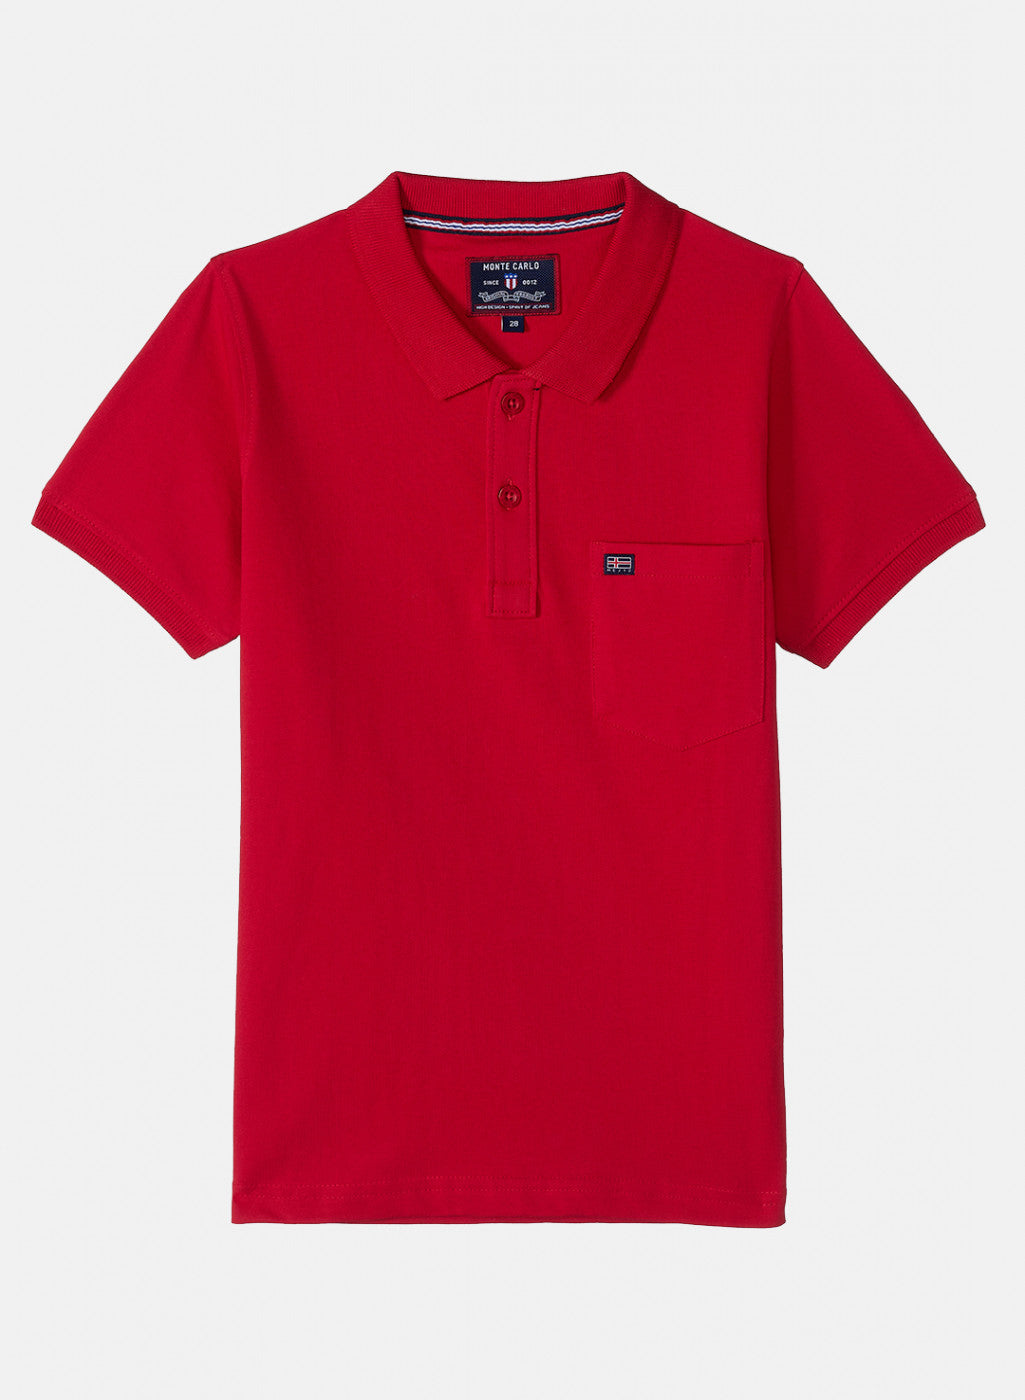 Buy Boys Red Plain T-Shirt Online in India - Monte